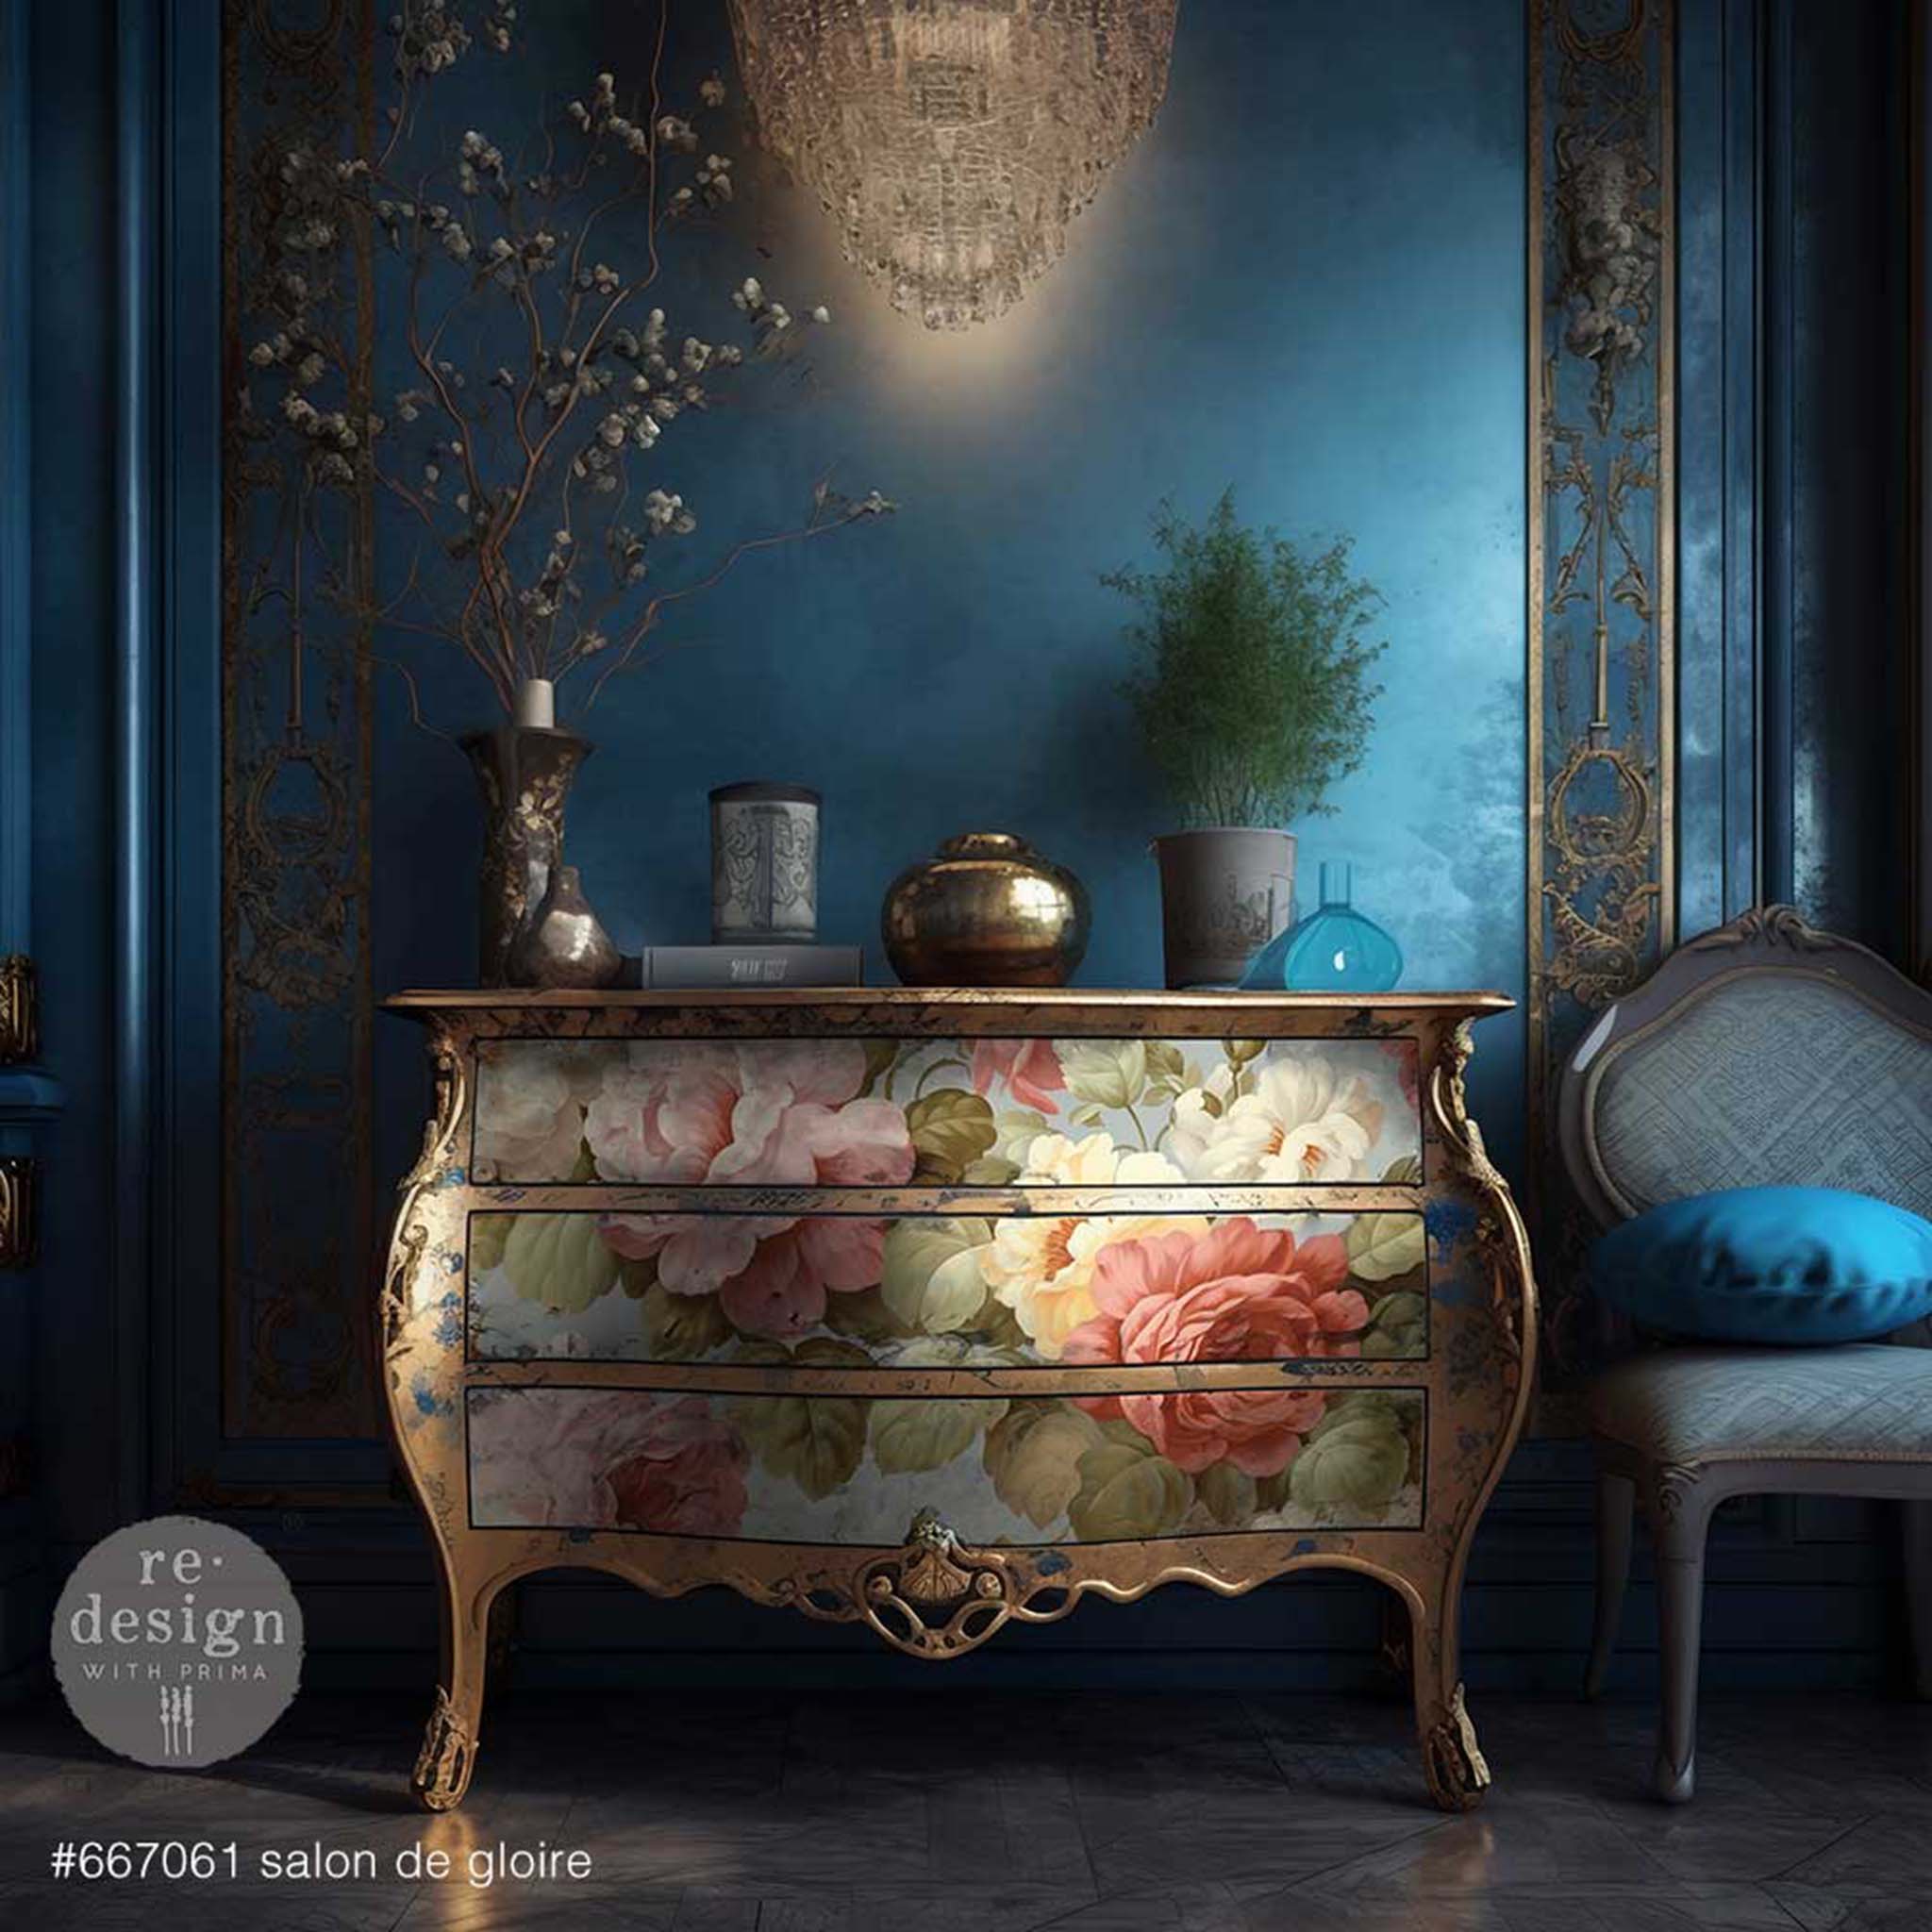 A vintage Bombay style dresser is painted gold with blotches of blue and features ReDesign with Prima's Salon de la Gloire A1 fiber paper on its 3 drawers.